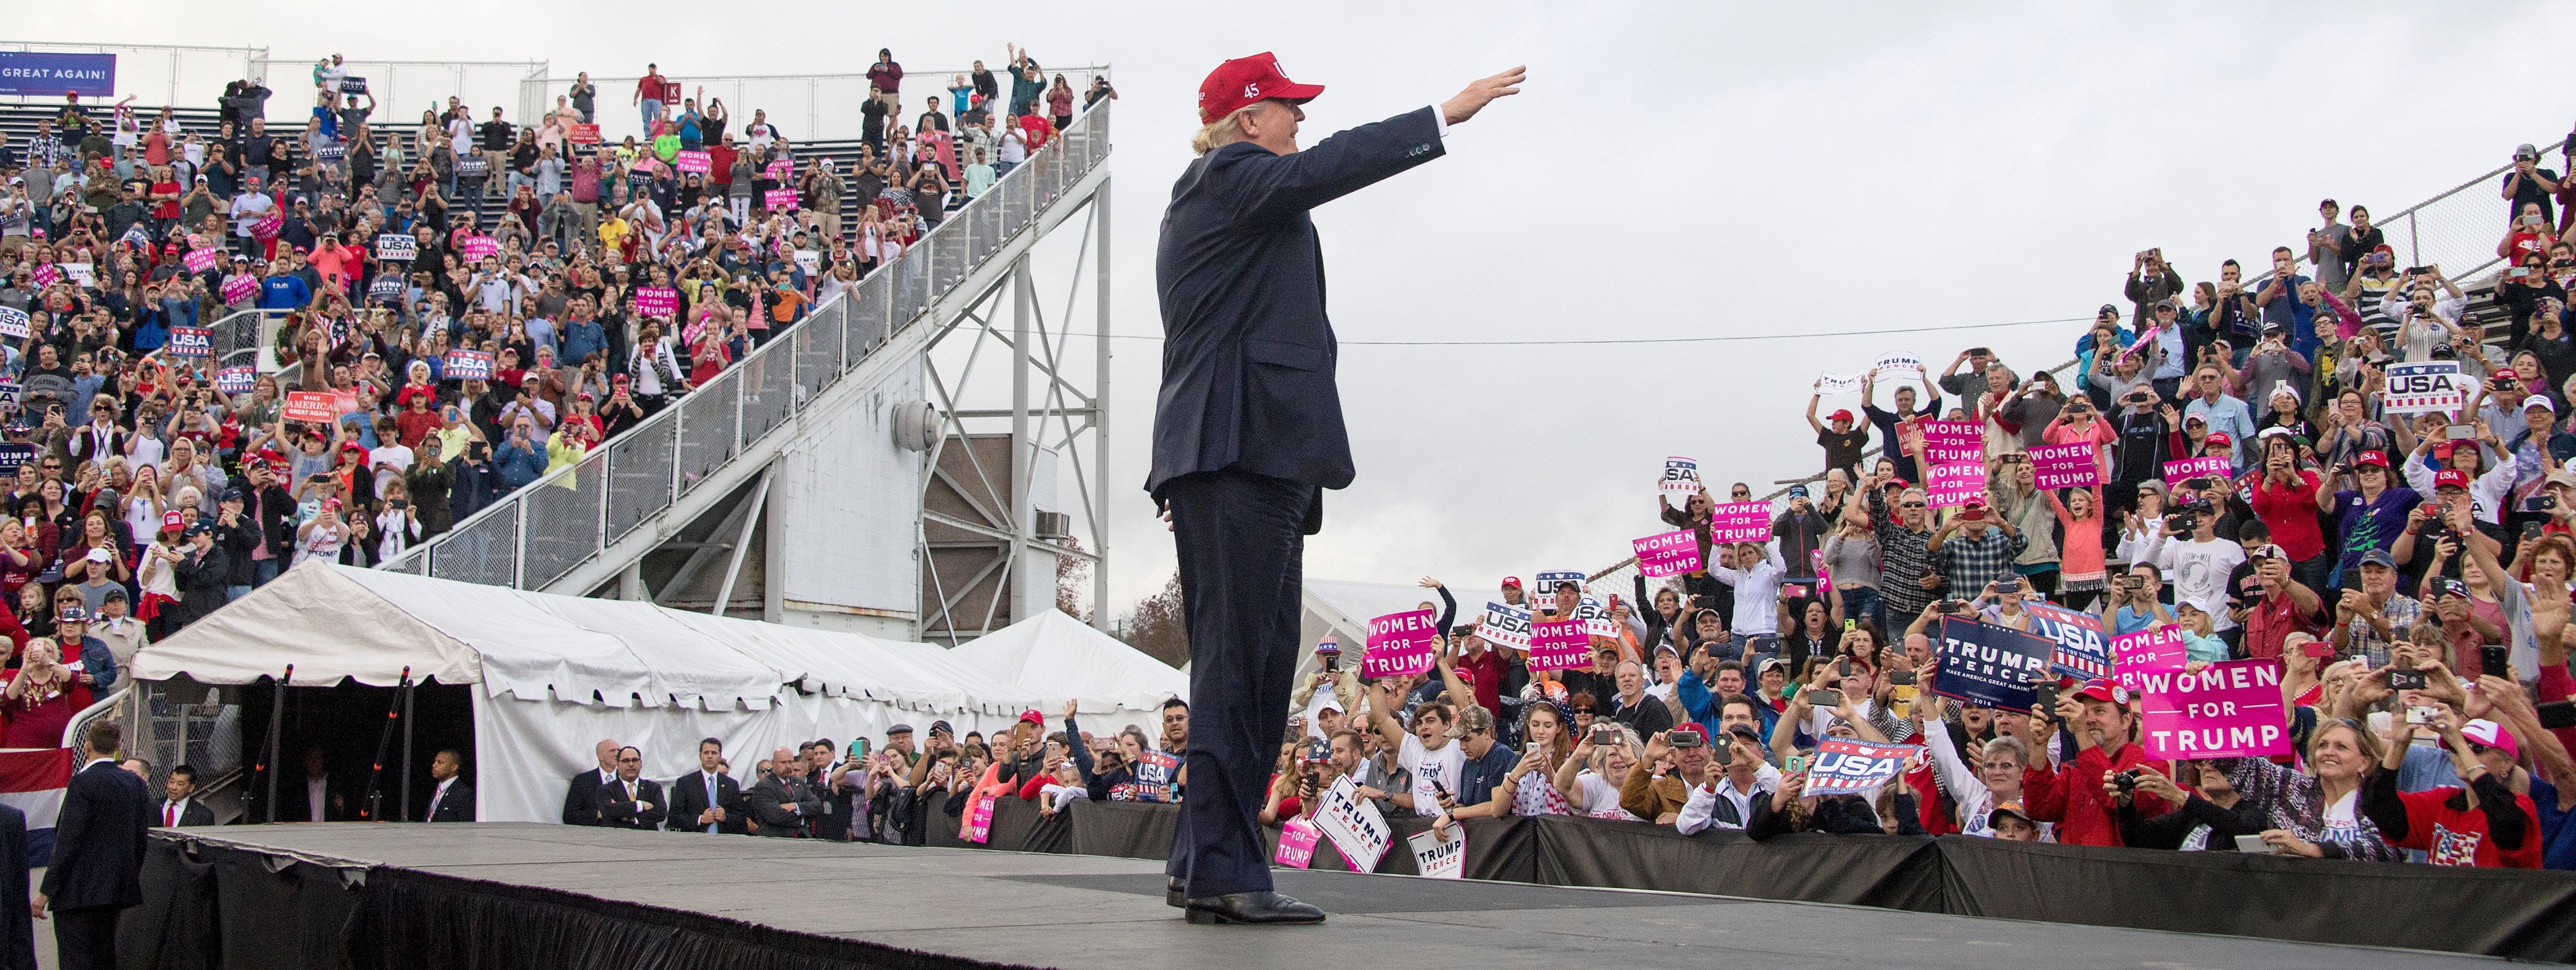 US President-elect Donald Trump waves to supporters in Mobile, Alabama, during a 'Thank You Tour 2016' rally on December 17, 2016.      (JIM WATSON--AFP/Getty Images) (JIM WATSON&mdash;AFP/Getty Images)